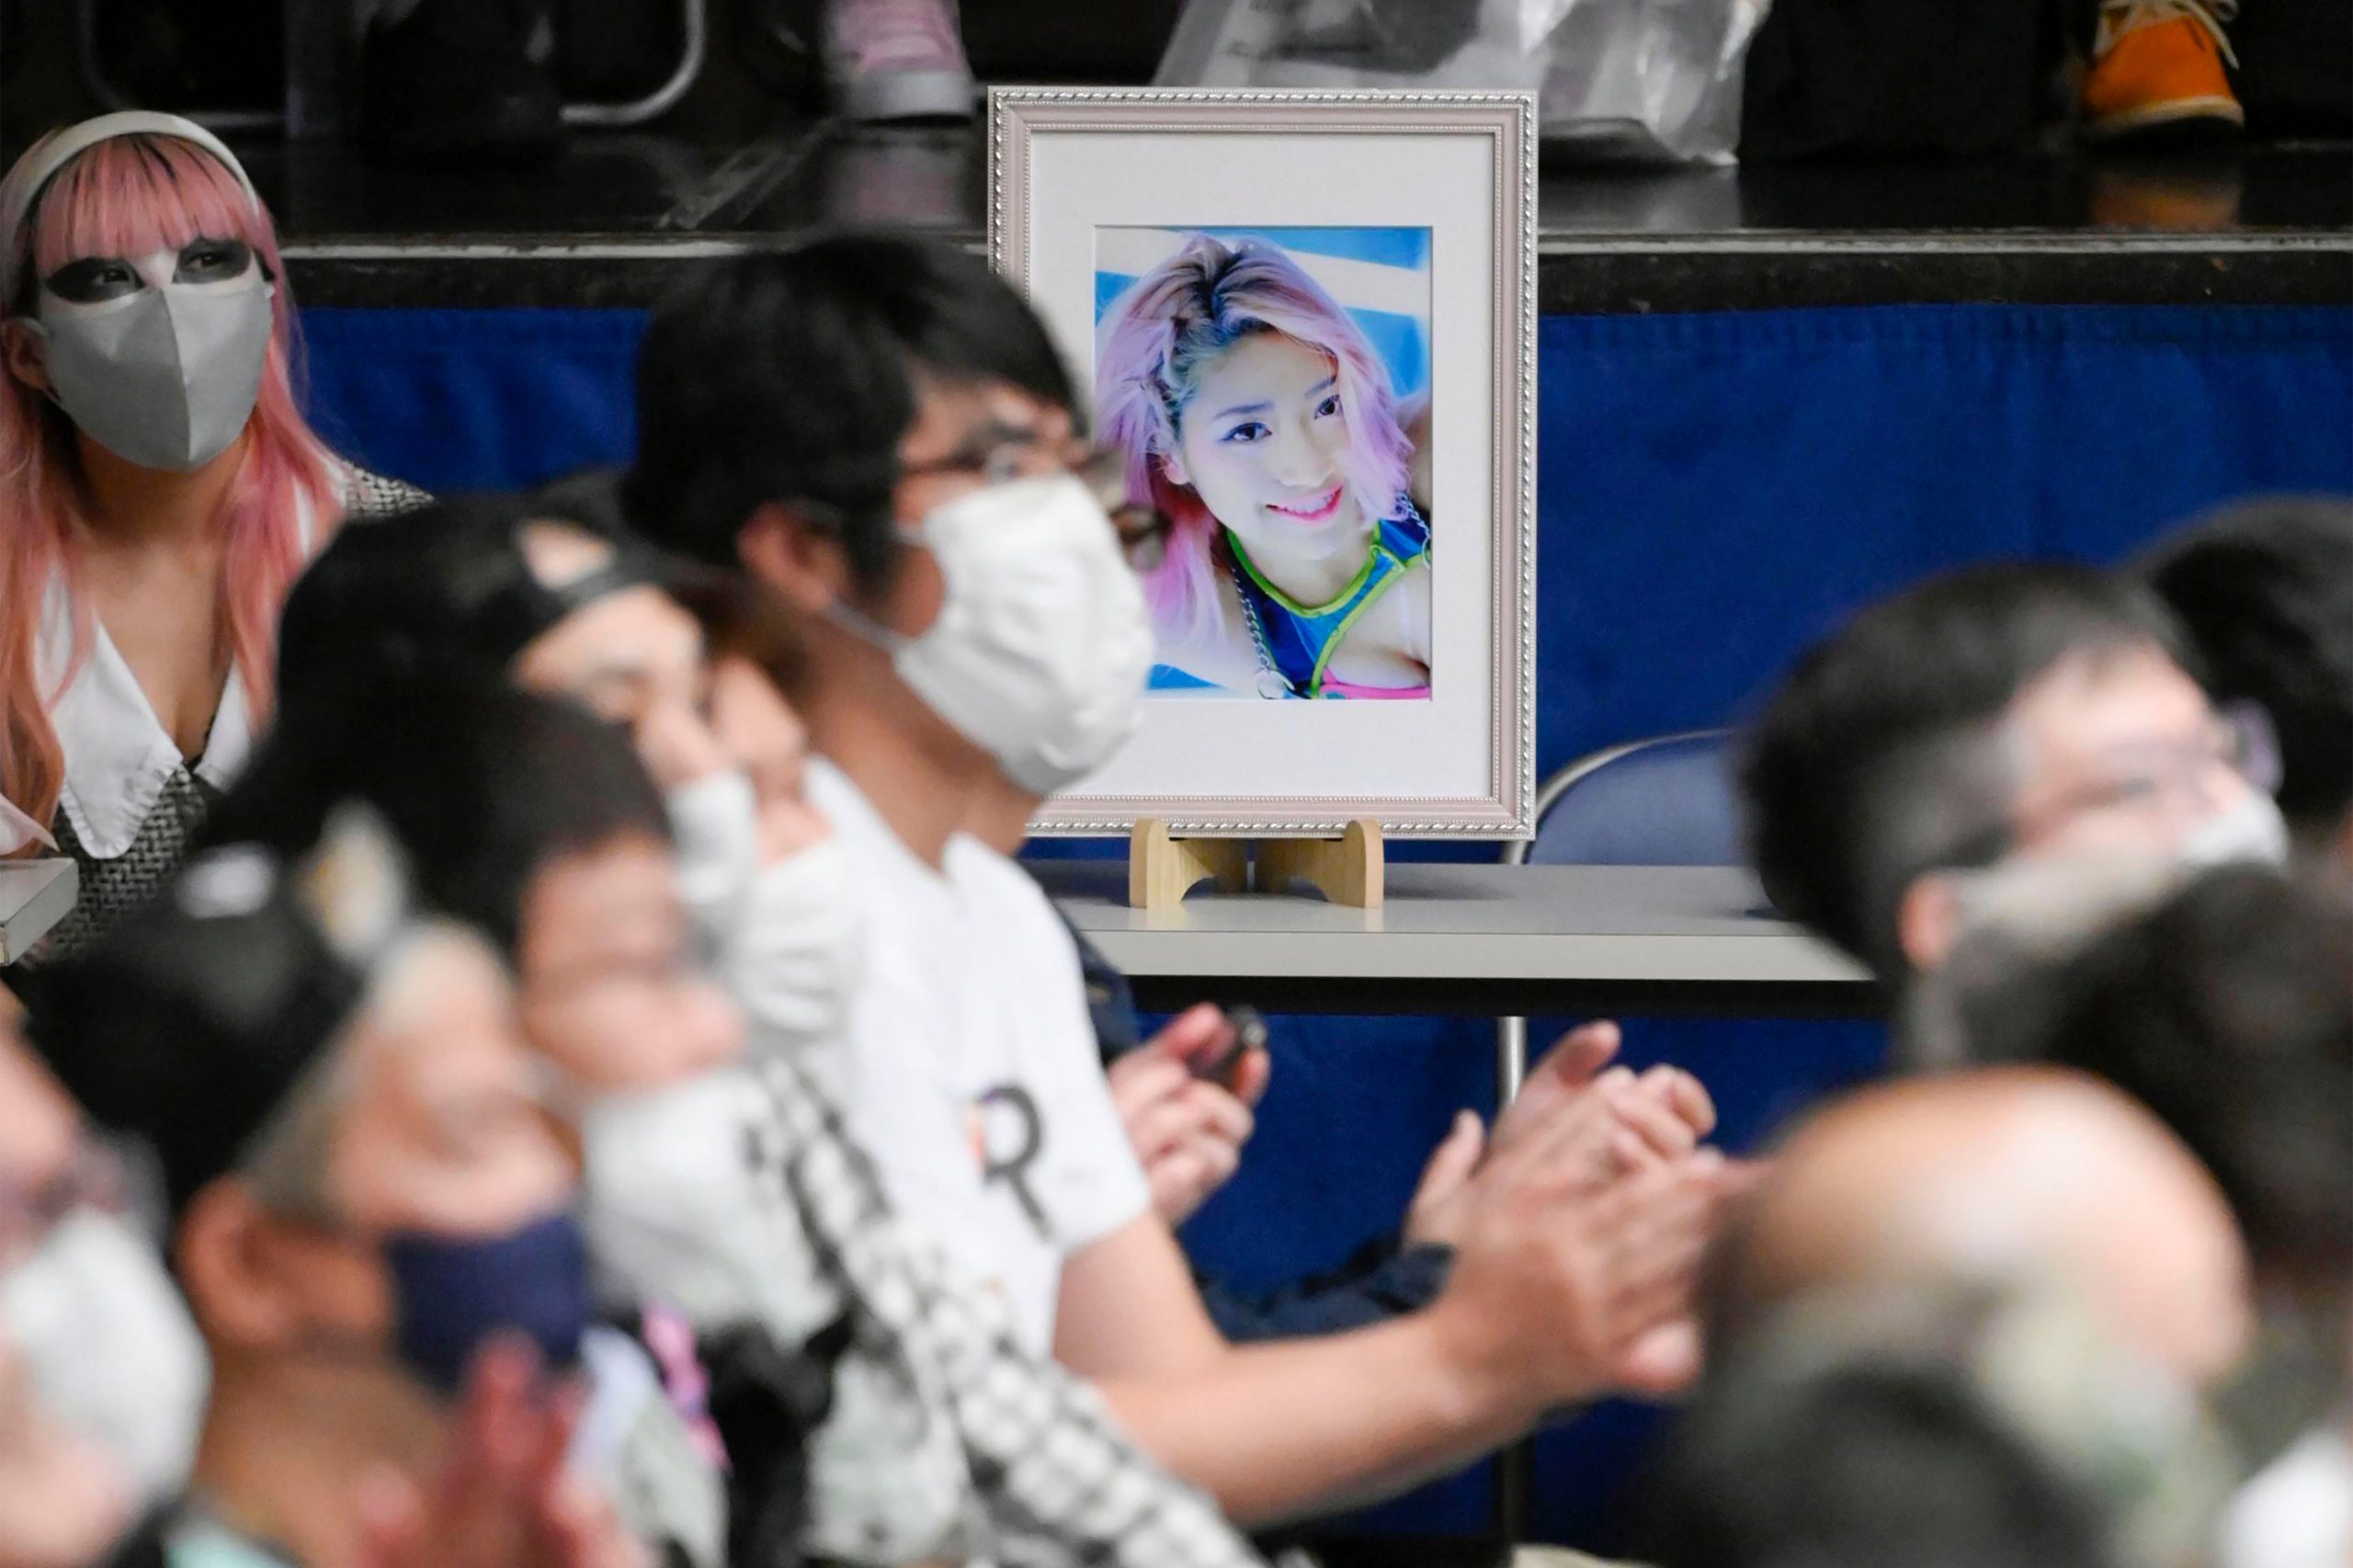 ‘Online insults’ now punishable in Japan after wrestler Hana Kimura’s suicide